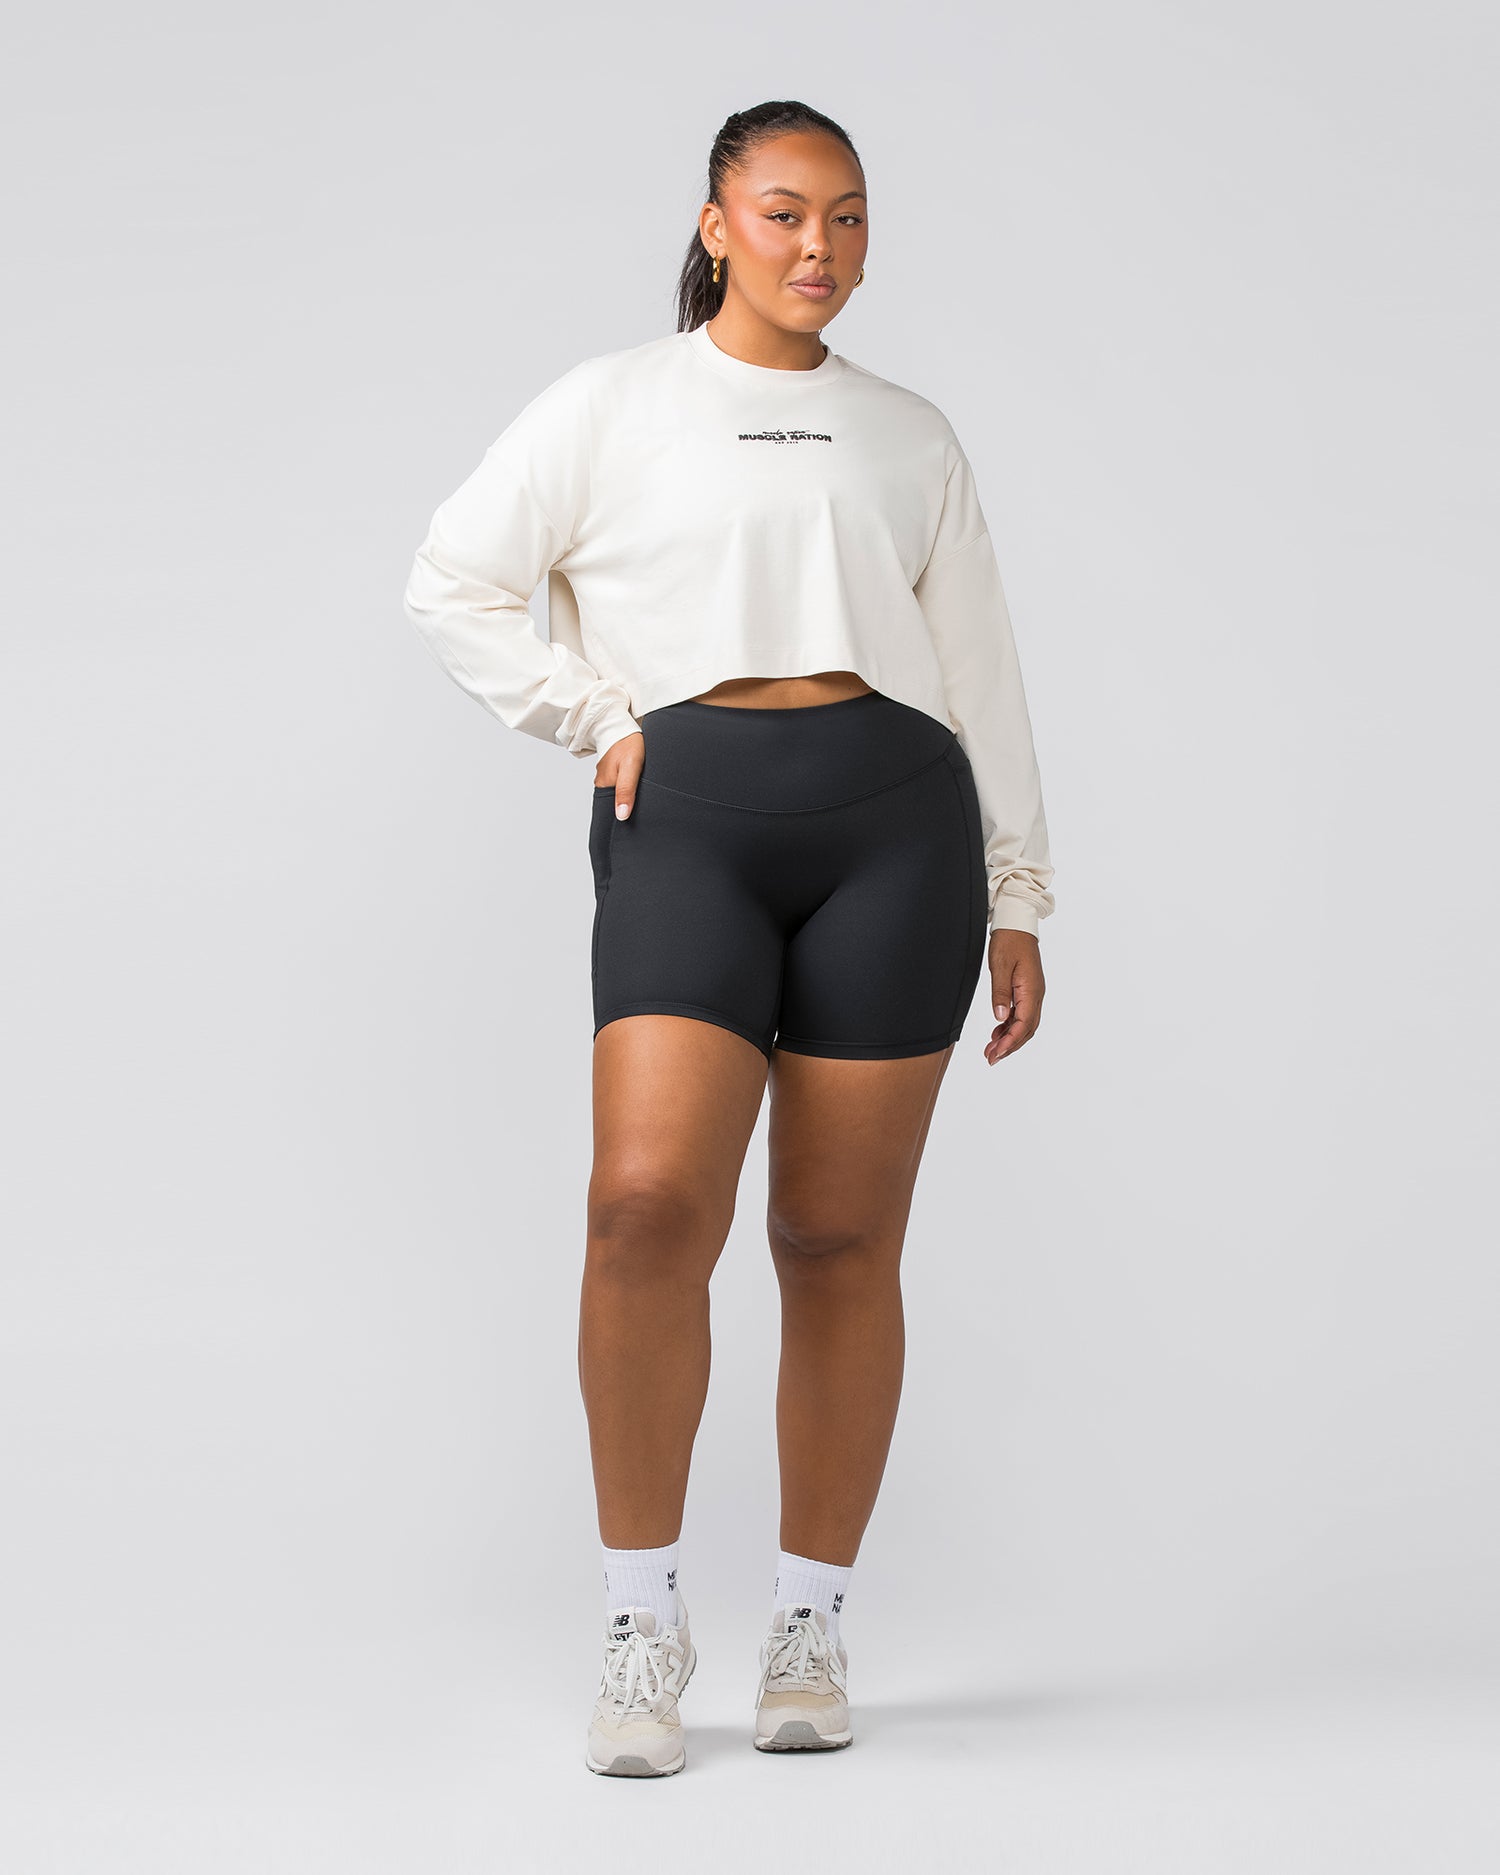 Pace Cropped Long Sleeve Tee - Dew